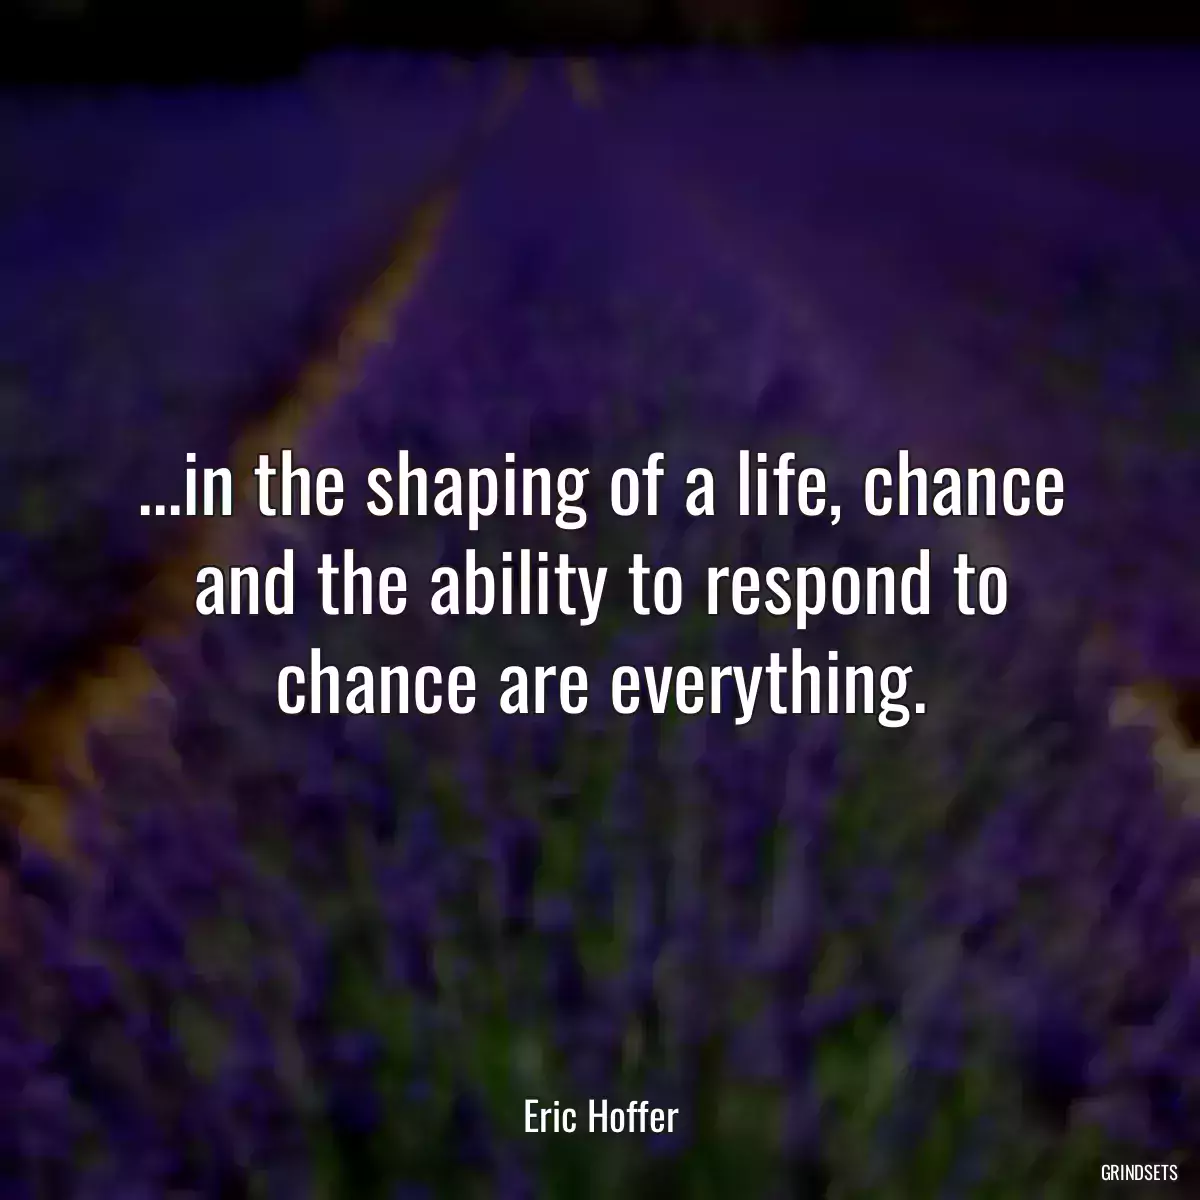 ...in the shaping of a life, chance and the ability to respond to chance are everything.